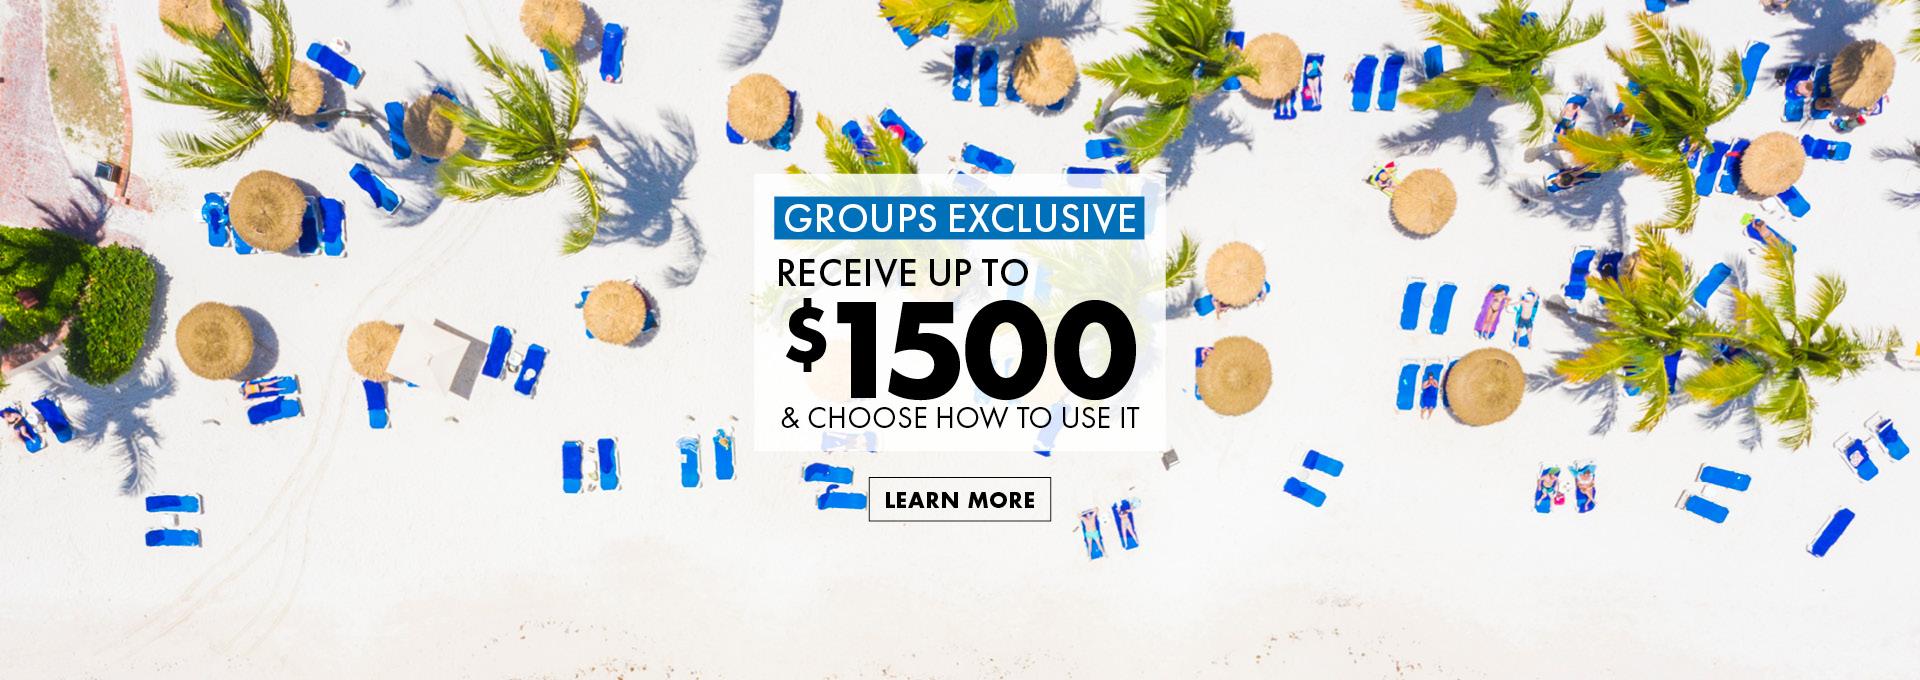 Groups Exclusive - Receive up to $1500 and choose how to use it